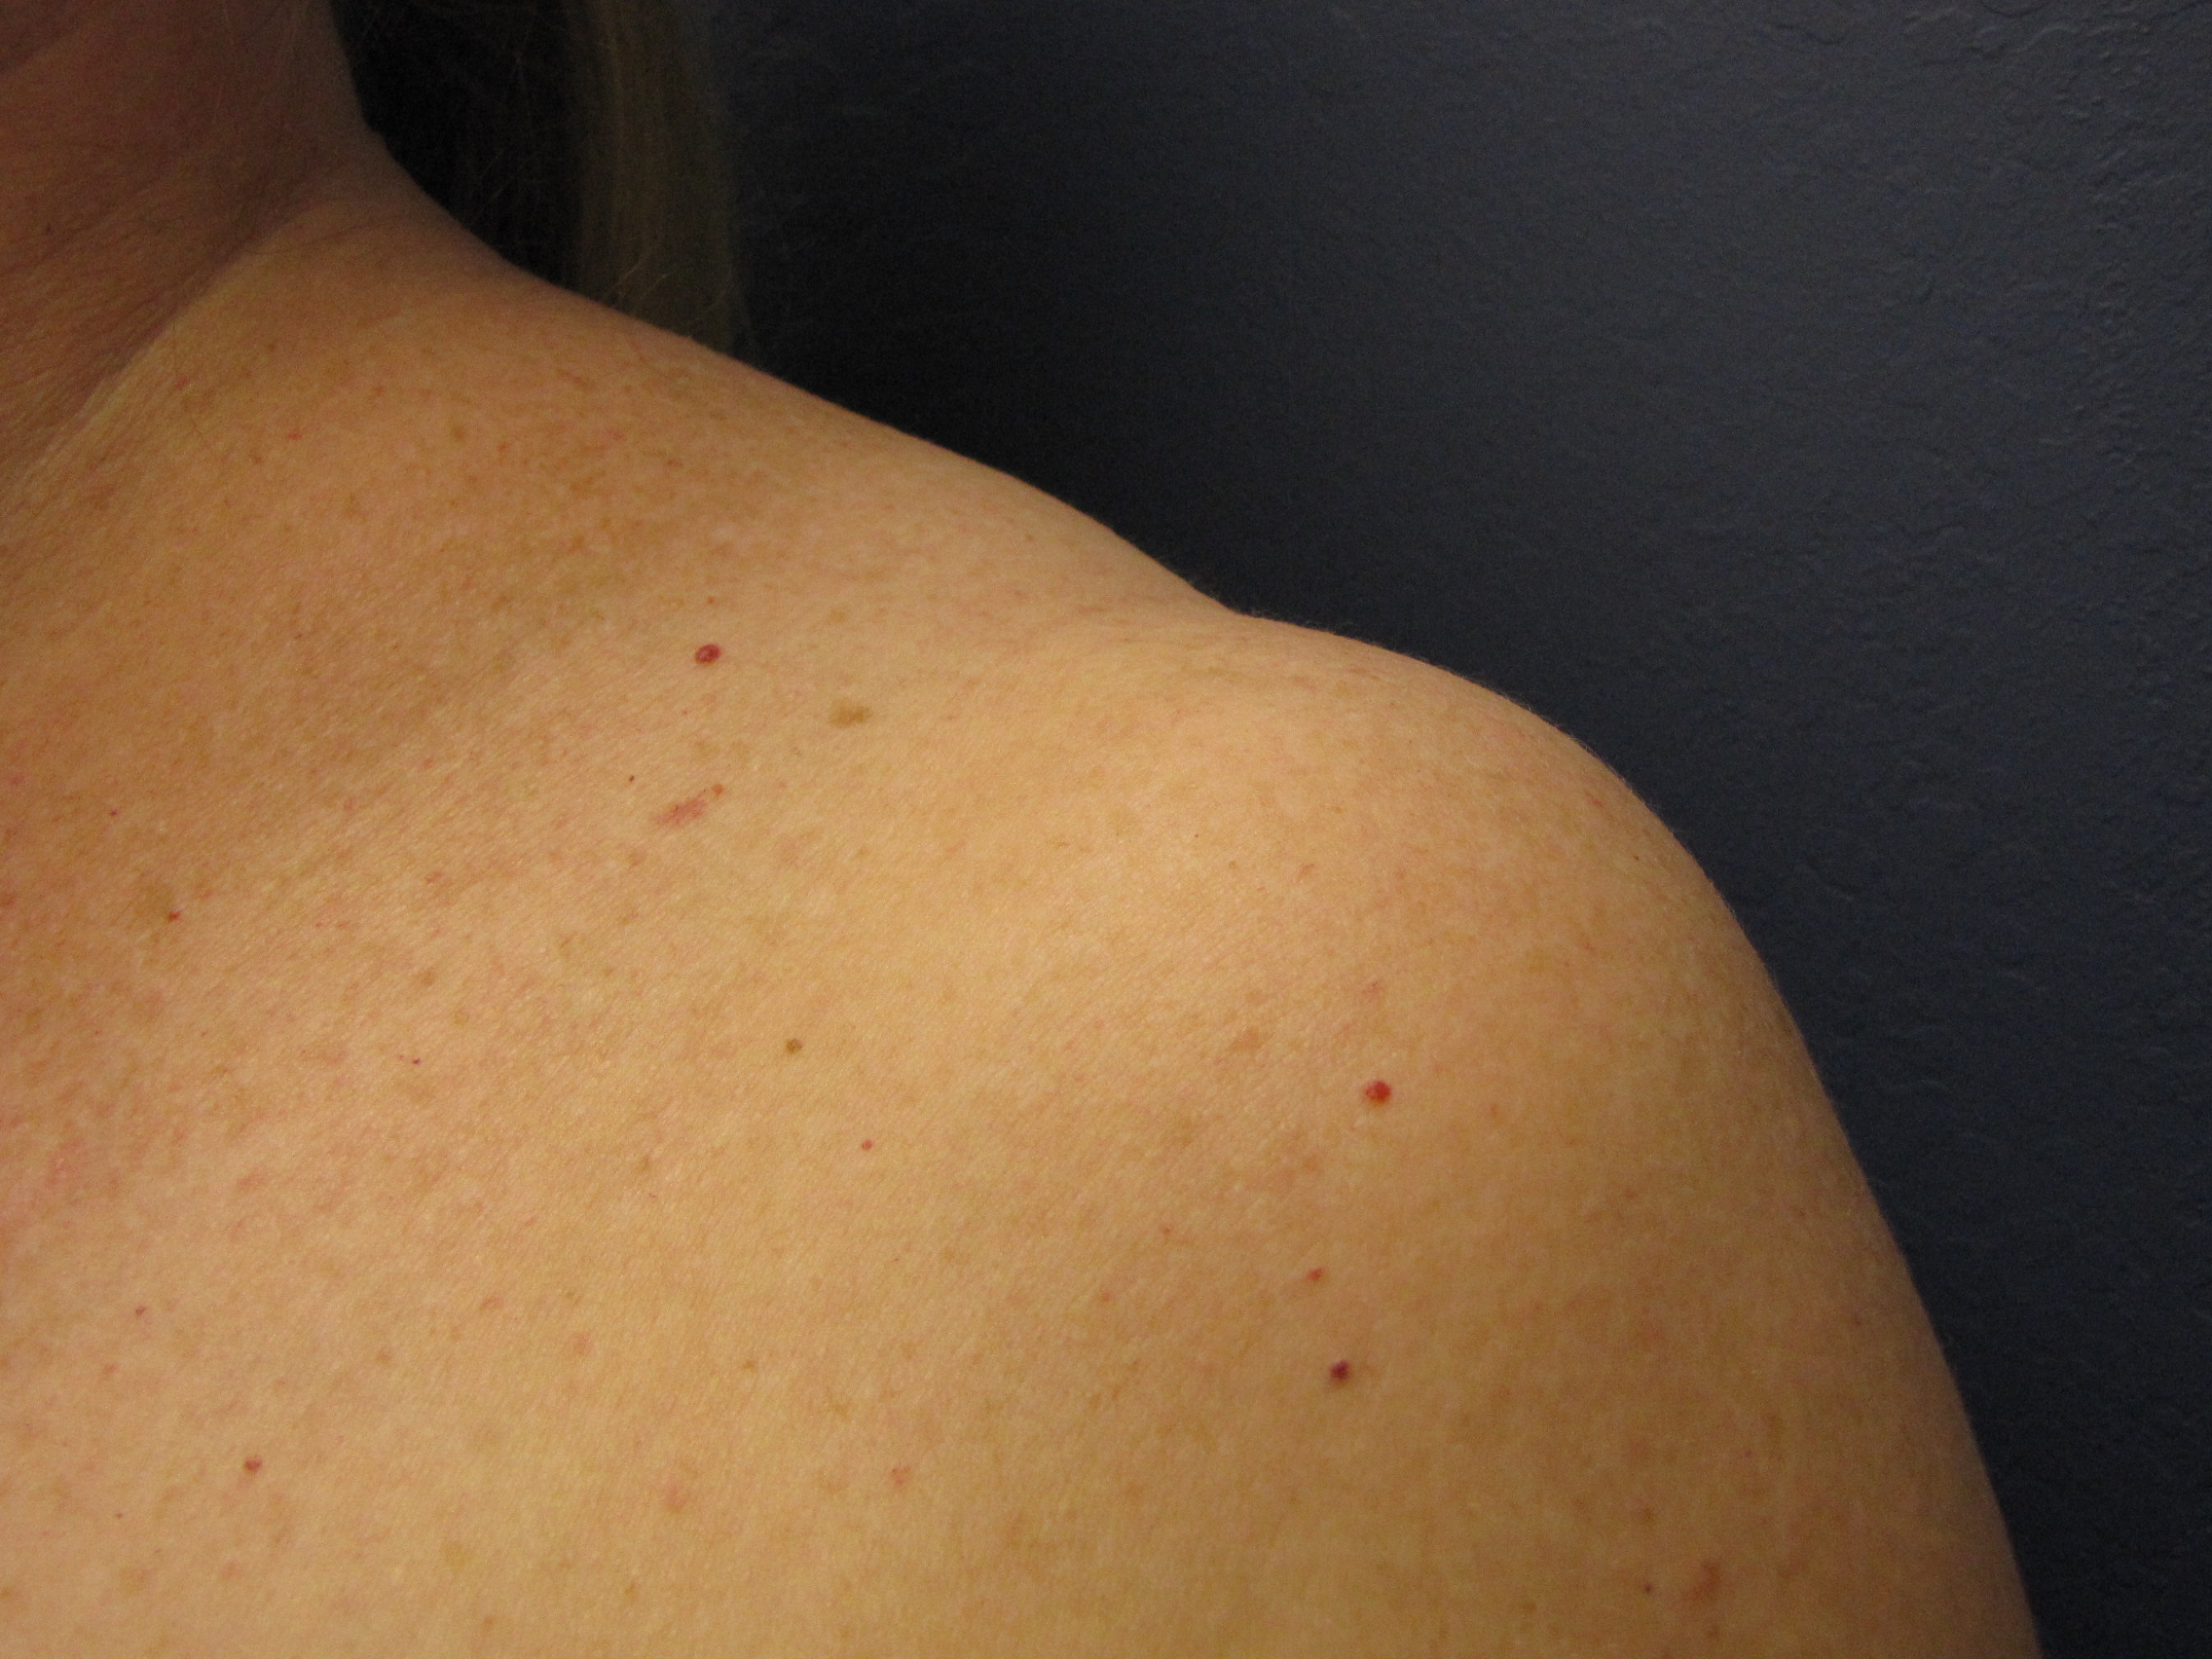 I have indents on my shoulders. Can this be corrected or are my